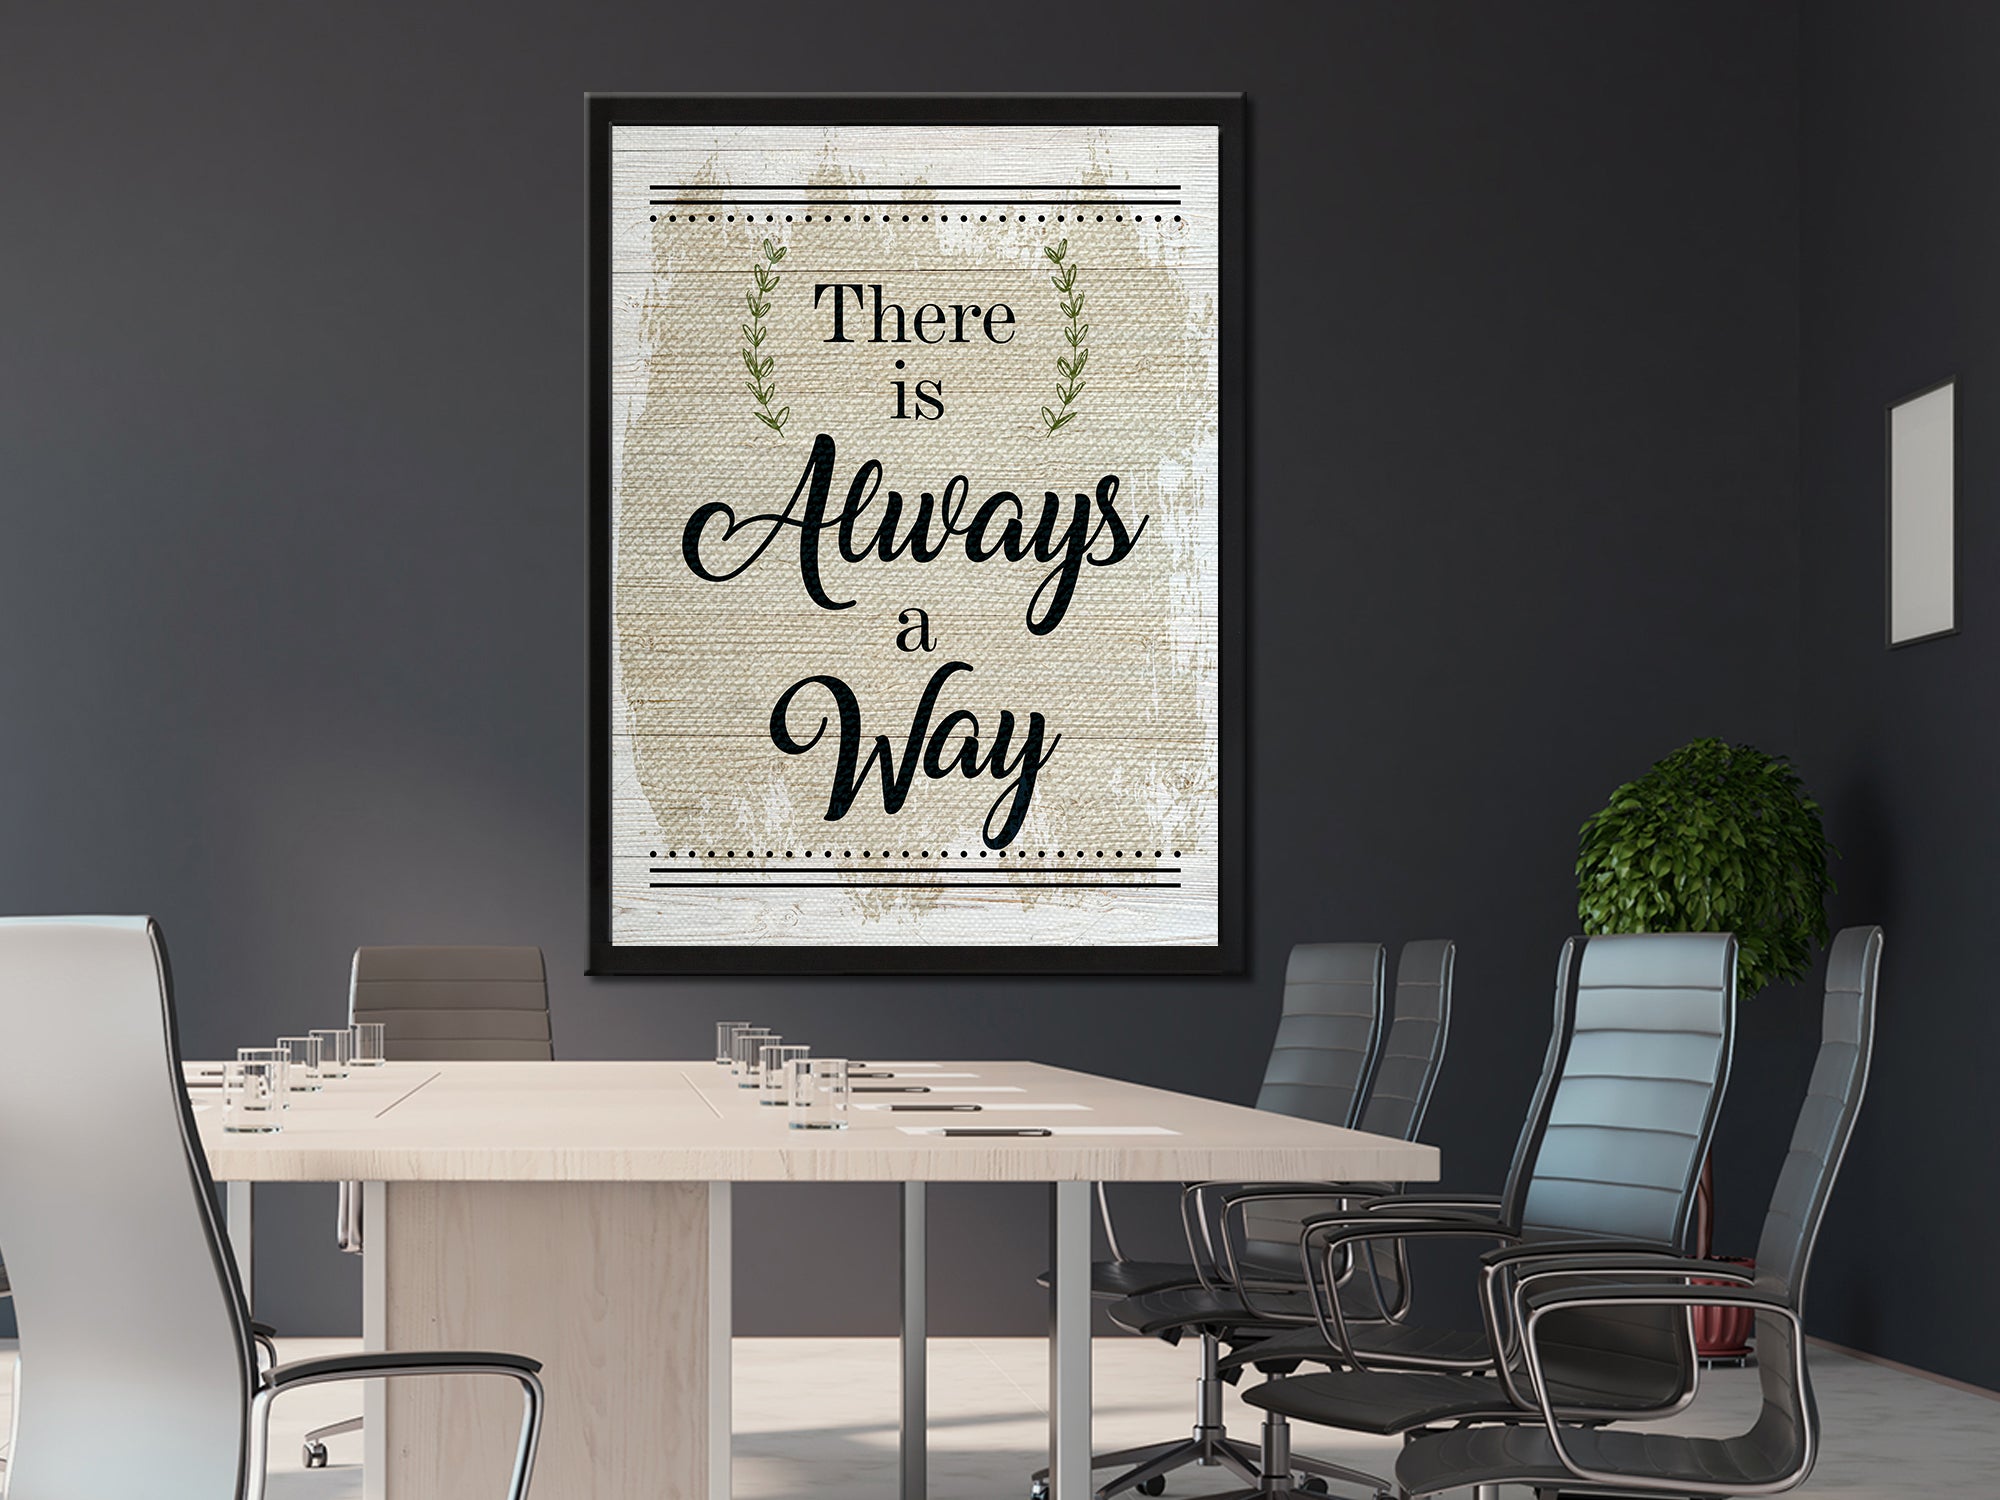 There is Always a Way - Inspiring - Canvas Wall Art